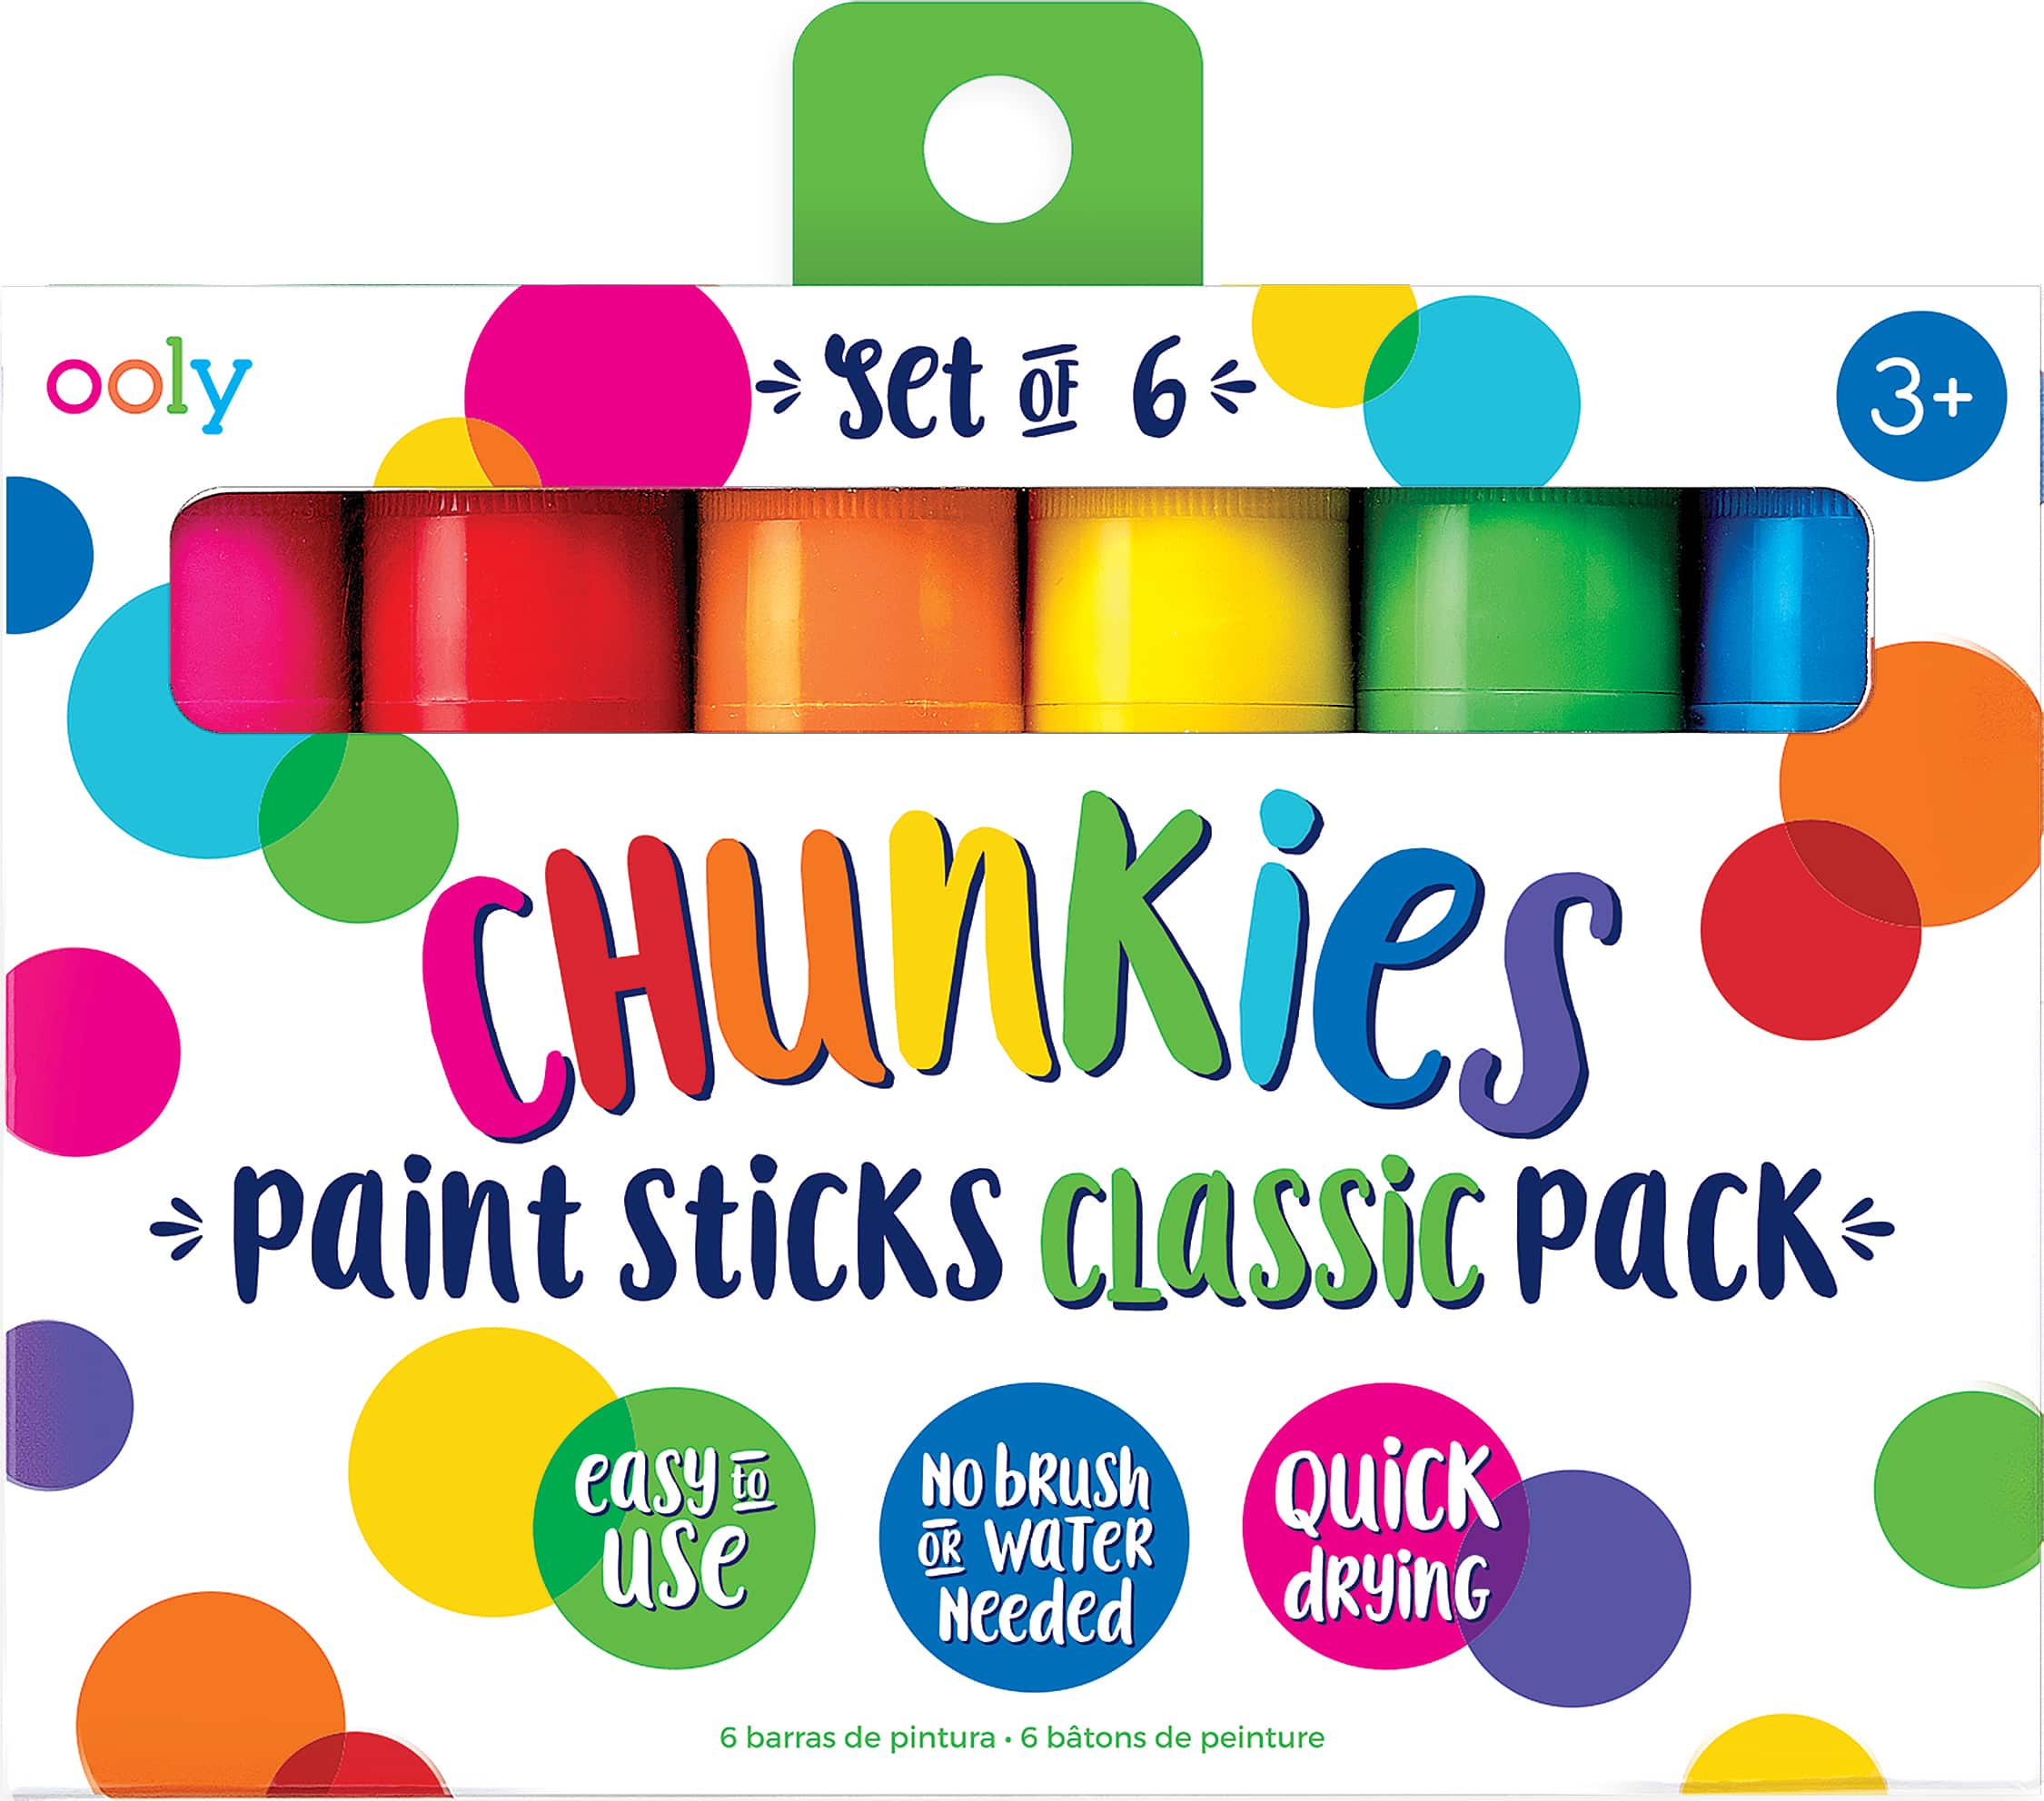 OOLY Chunkies Classic Paint Sticks, 6ct.